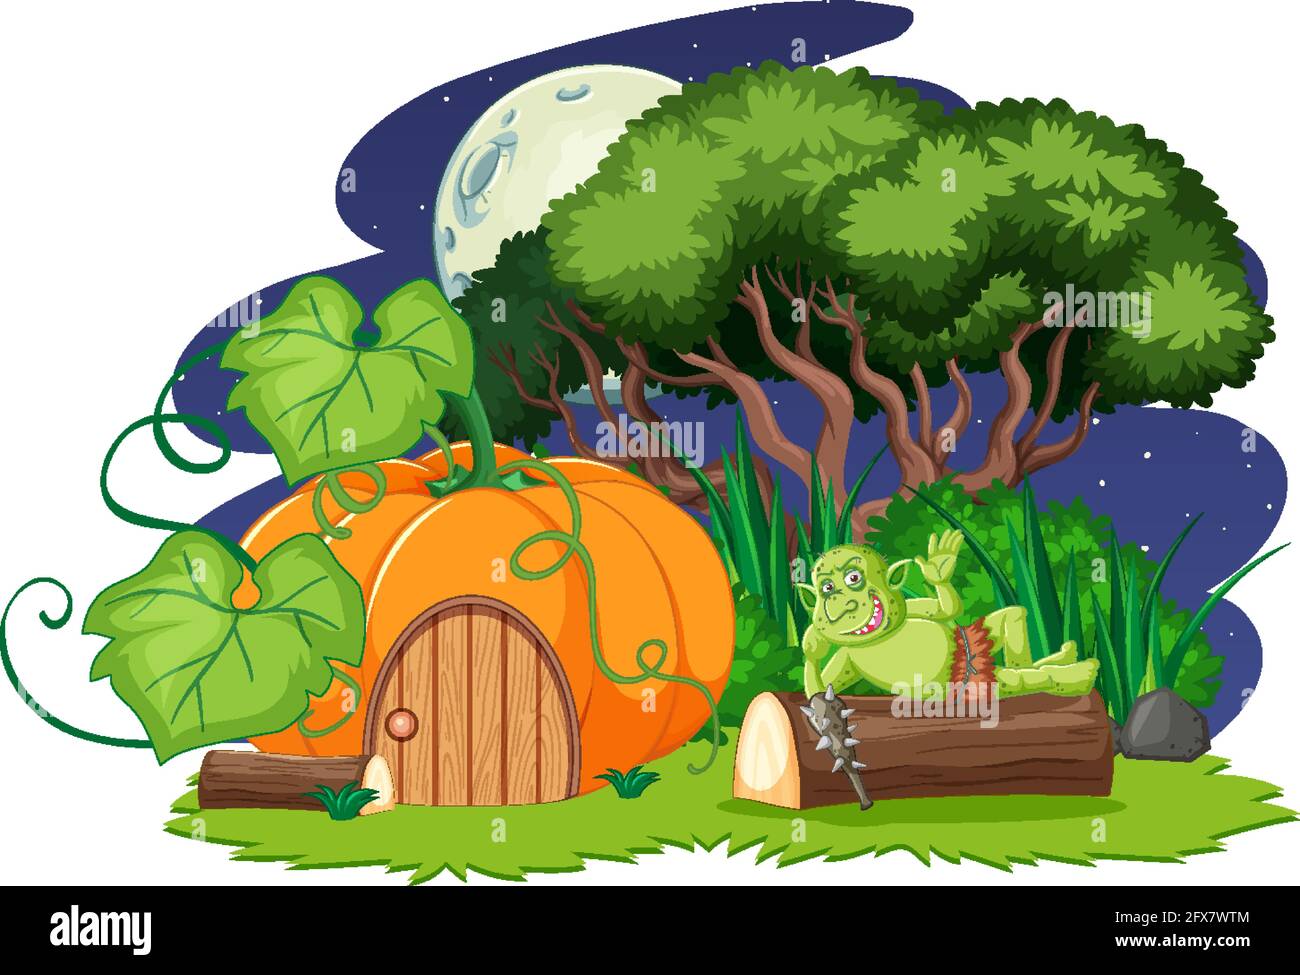 Night scene with goblin or troll cartoon character and pumpkin house illustration Stock Vector